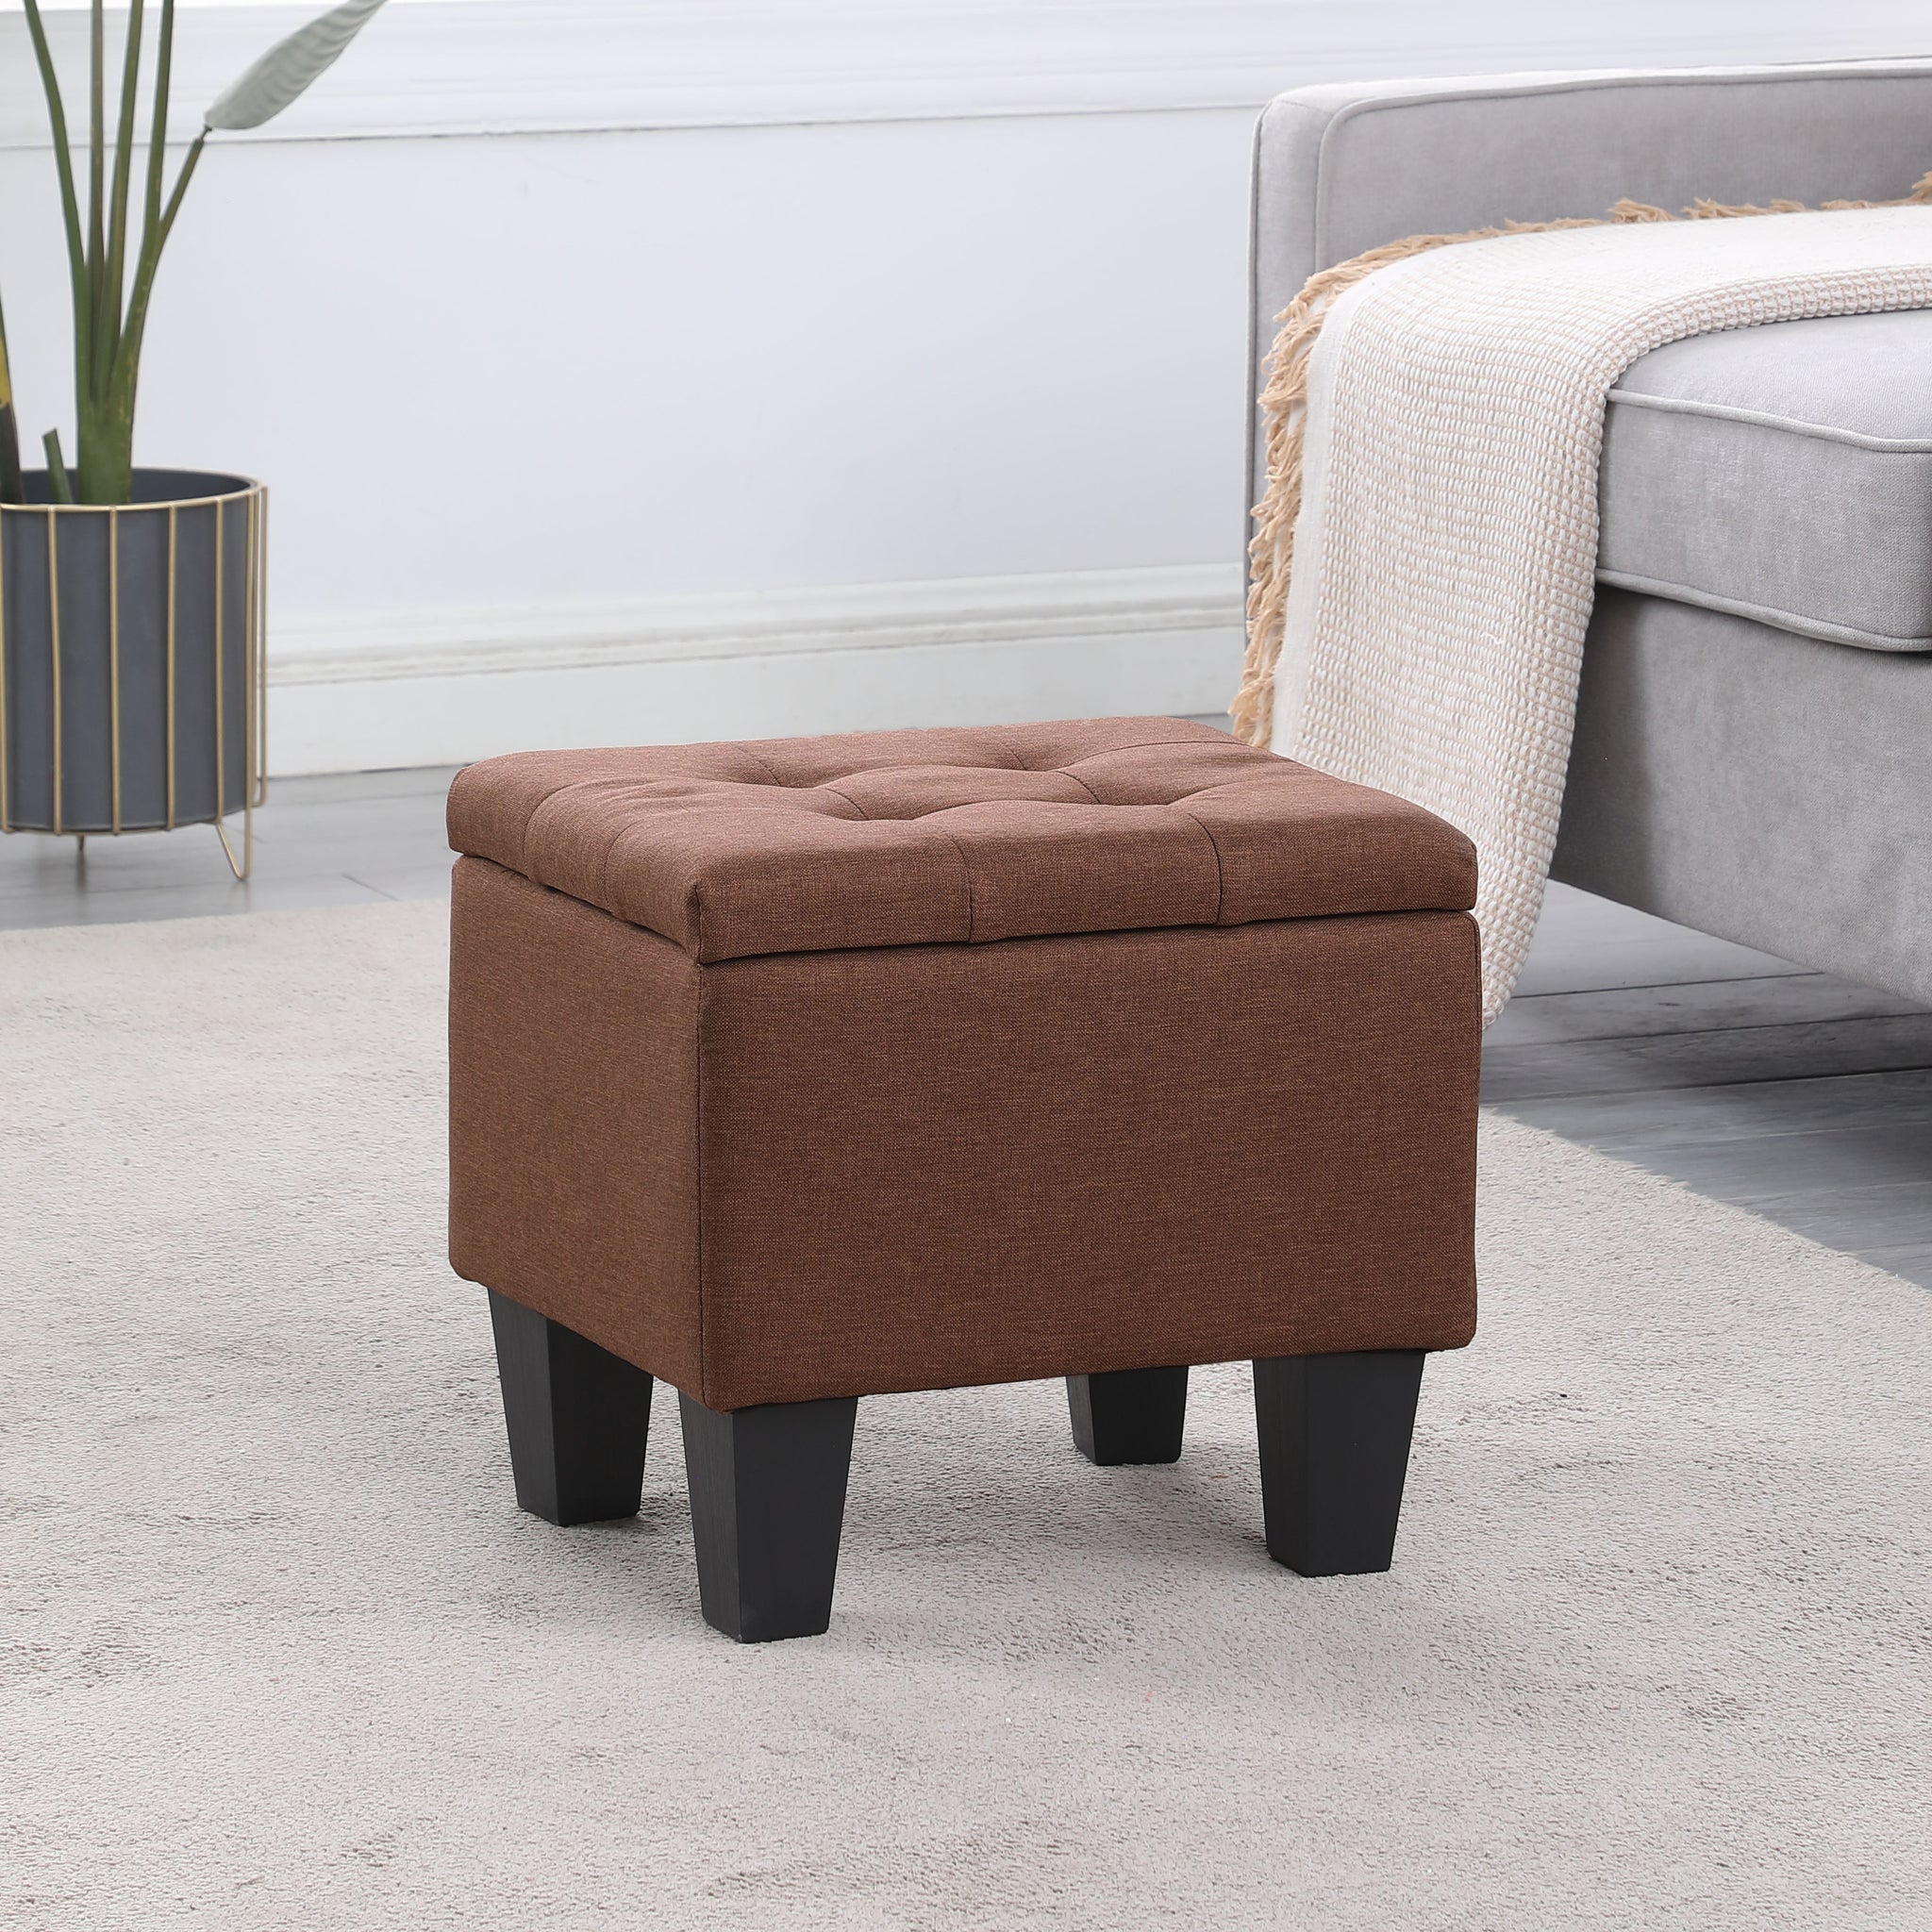 VIDEO Large Storage Ottoman Bench Set, 3 in 1 brown-fabric